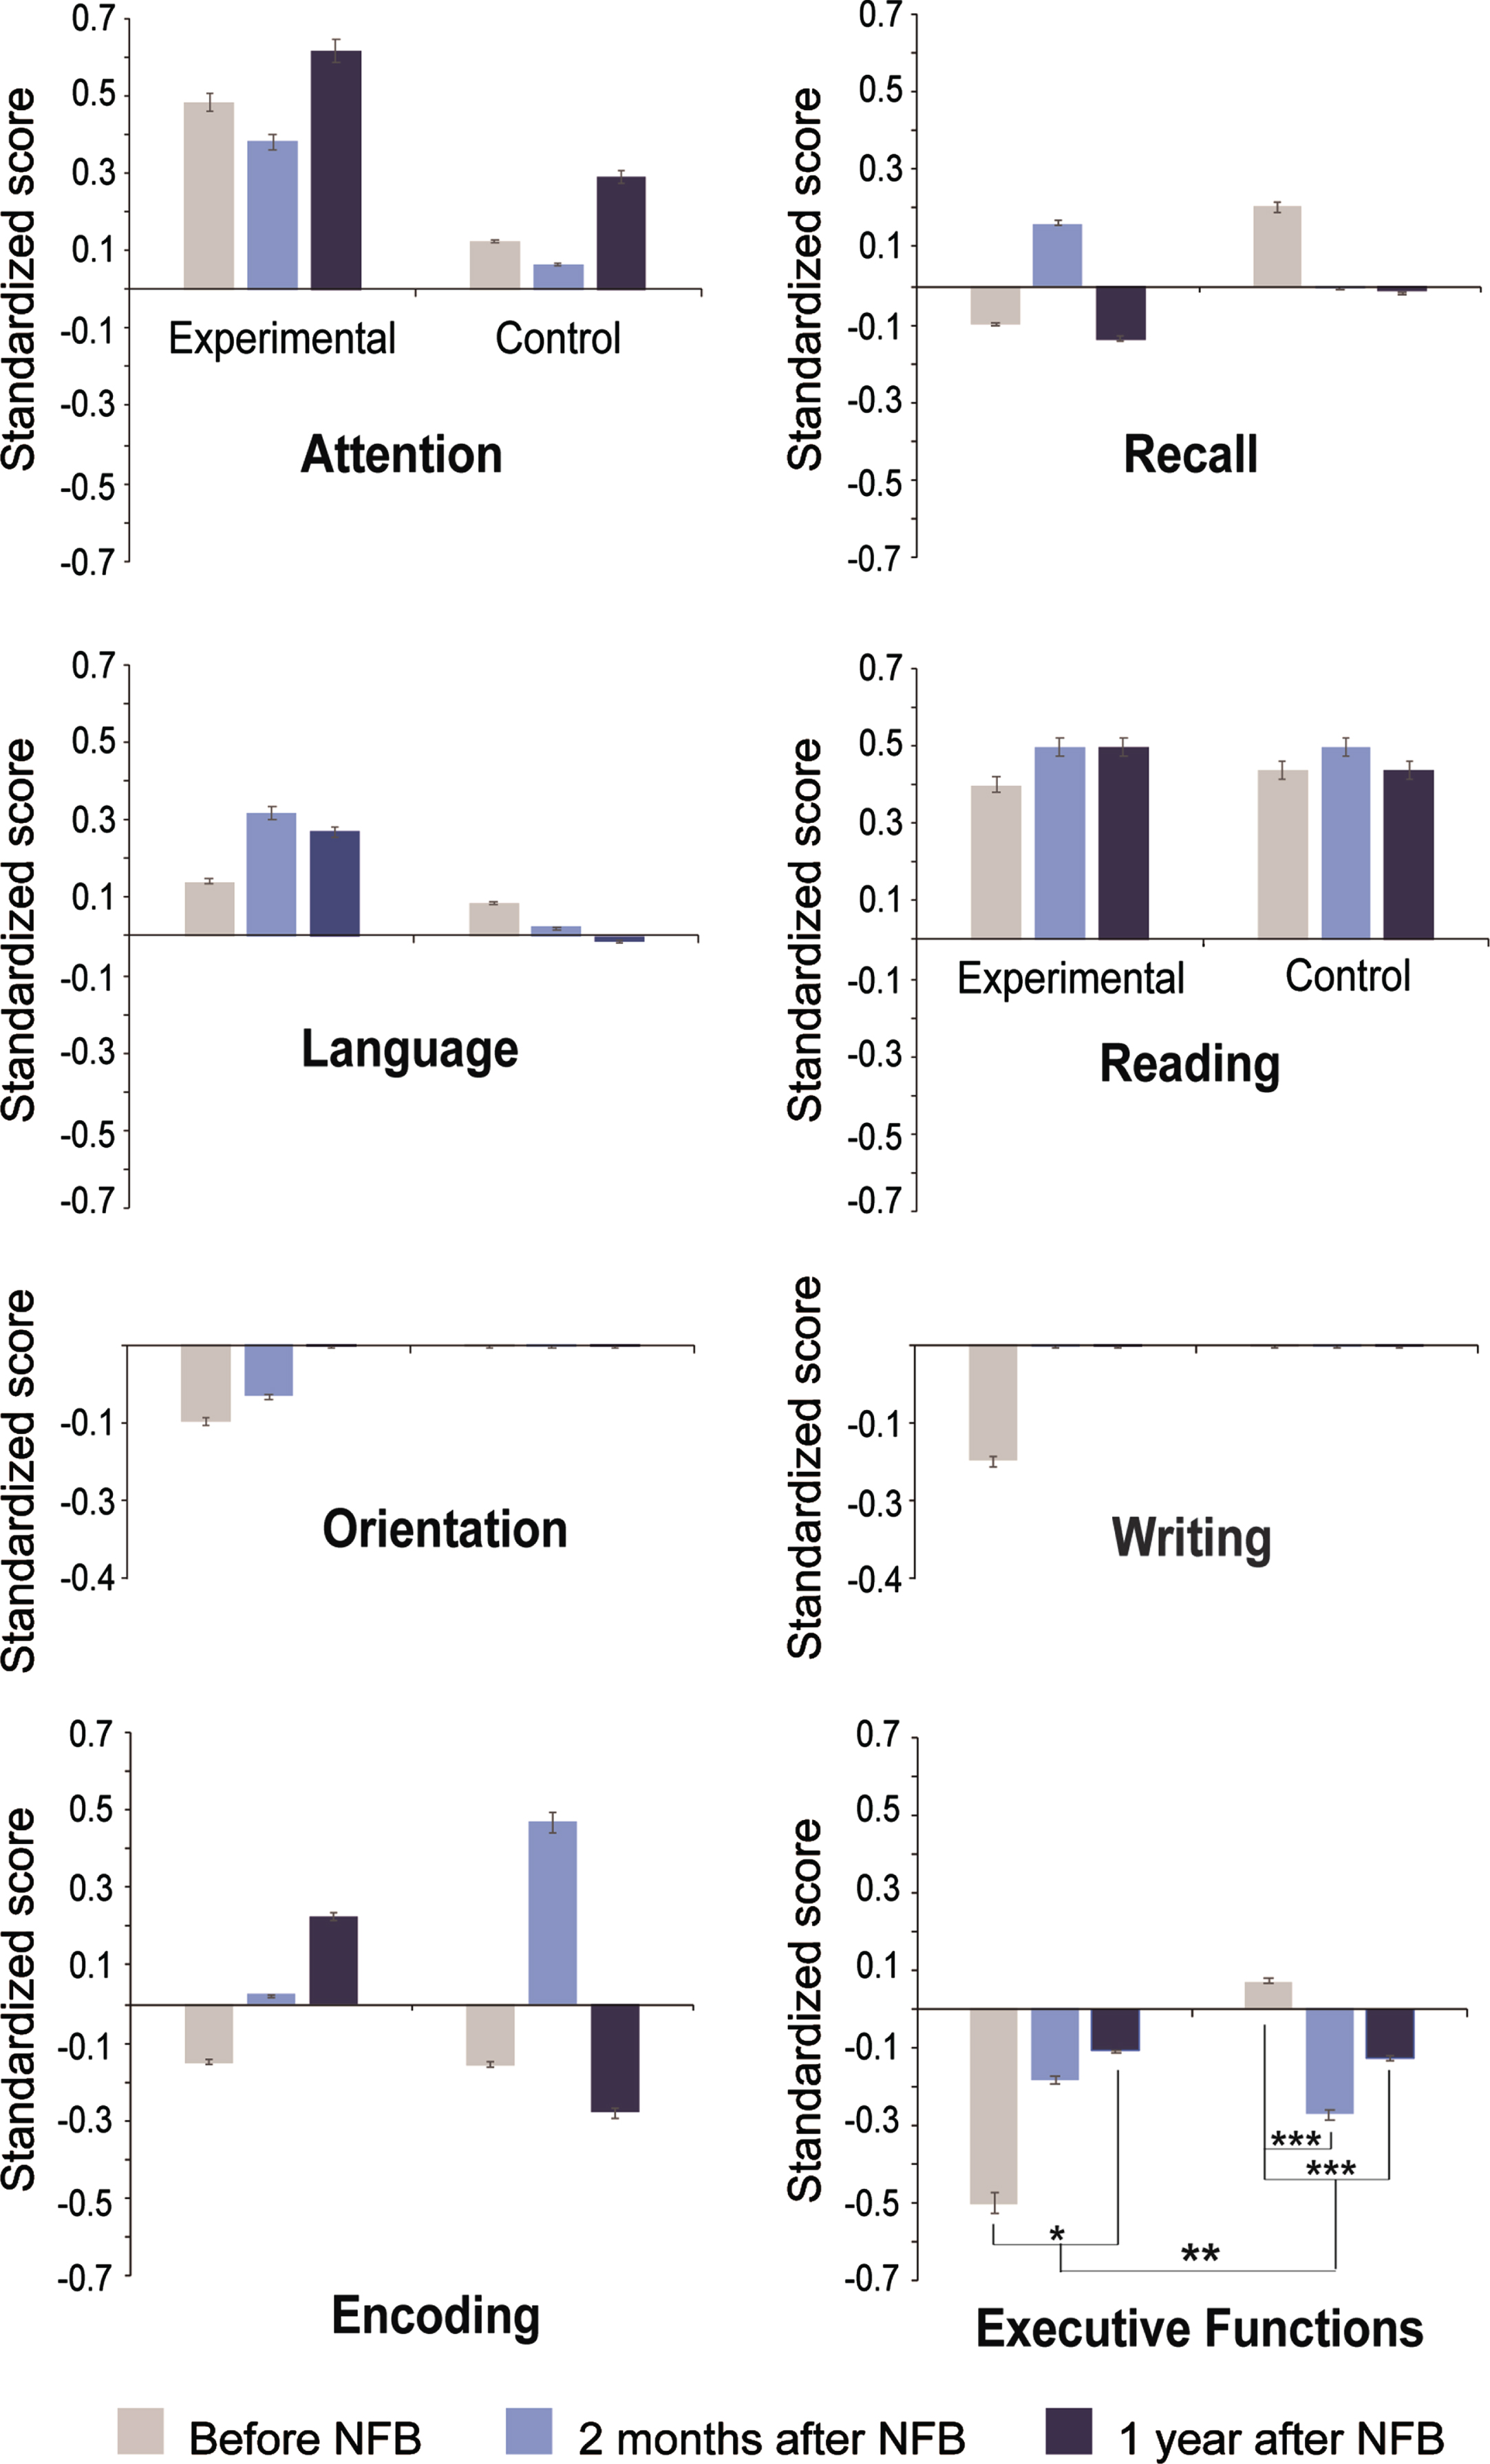 Significant neuropsychological differences over time and between groups in the NEUROPSI. The y-axes show the standardized scores resulting from neuropsychological assessments in both groups at the three evaluation time points: before treatment, two months after treatment and one year after treatment. *p < 0.05, **p < 0.01.